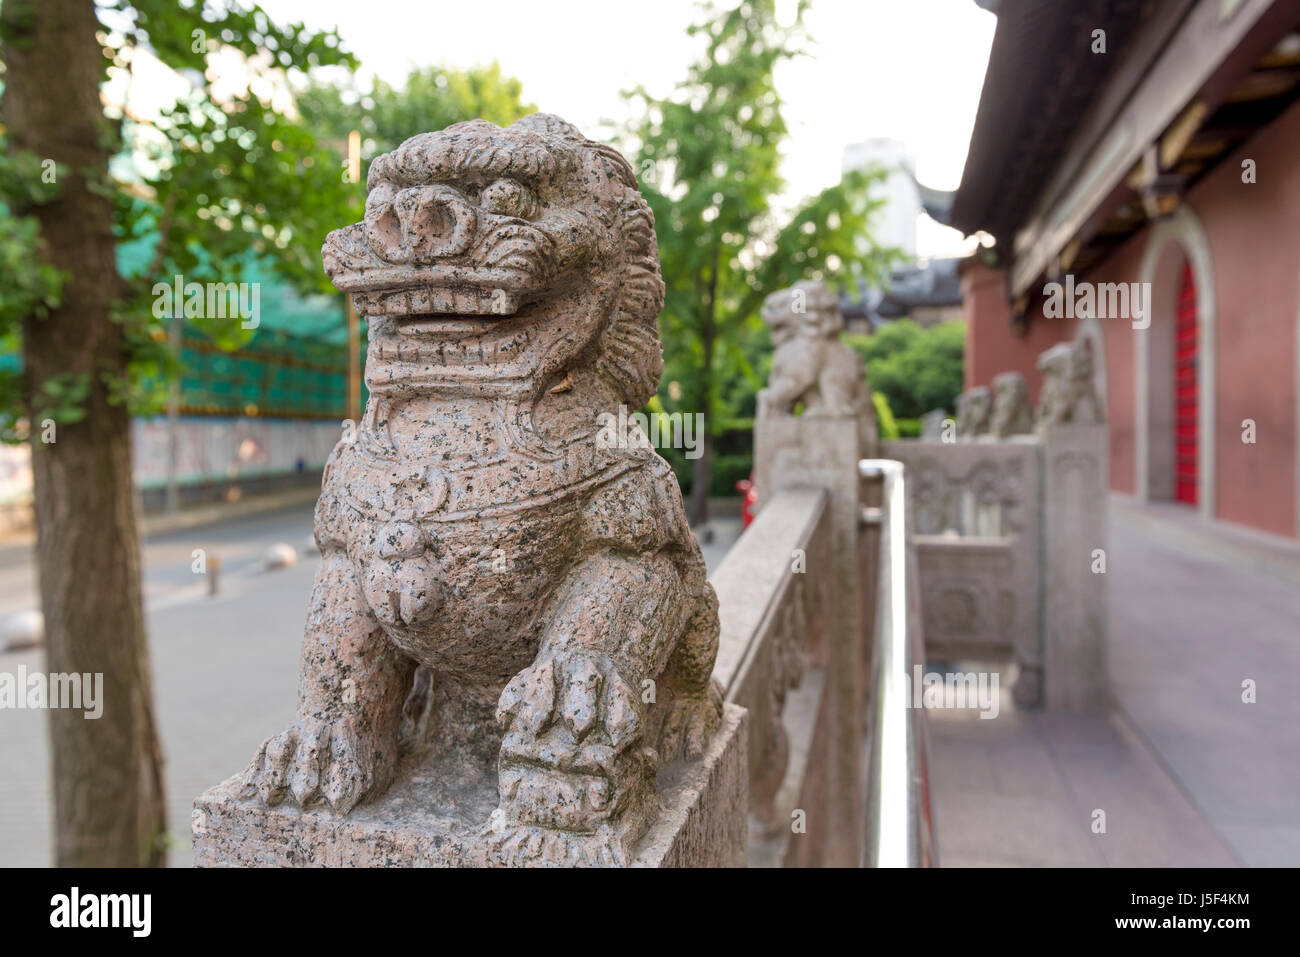 Lion guardian stone statues protecting a Buddhist temple in Shanghai, China Stock Photo